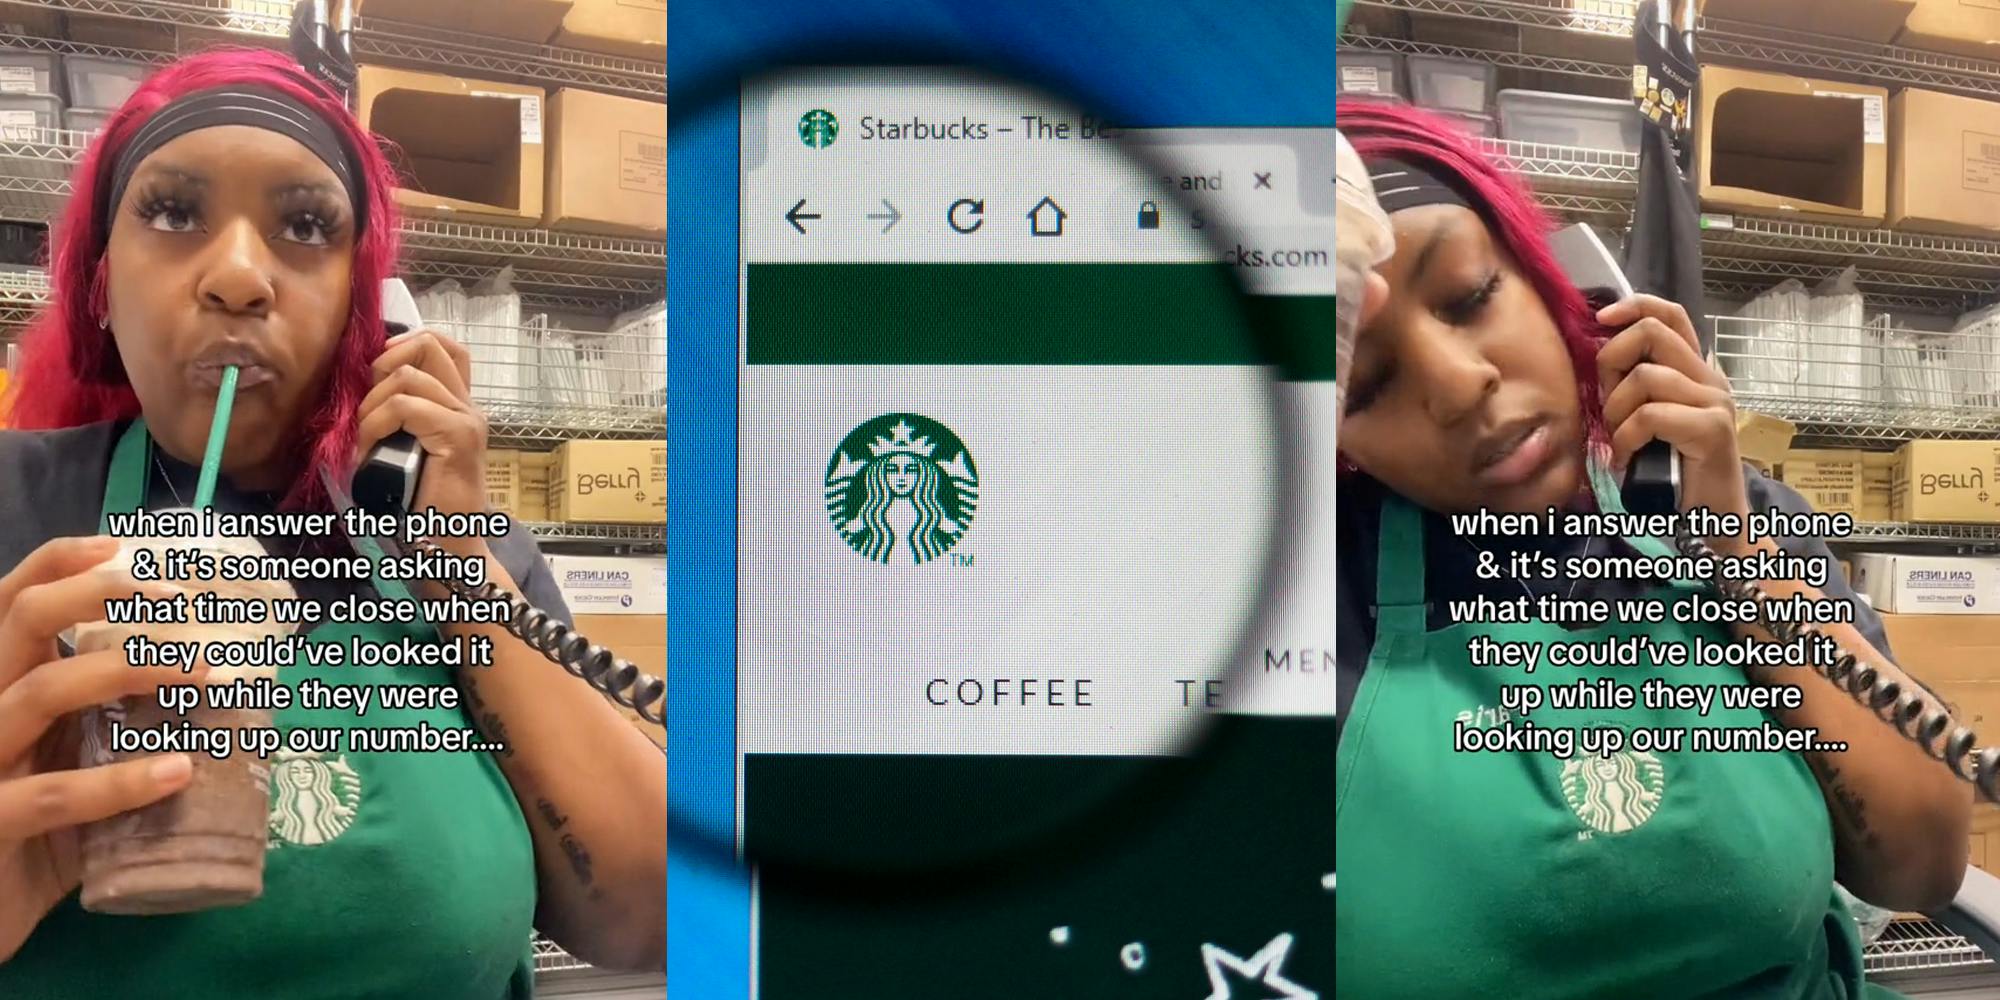 Starbucks worker on phone with caption "when i answer the phone & it's someone asking what time we close when they could've looked it up while they were looking up our number..." (l) Starbucks website in search bar on laptop screen with magnifying glass circling Starbucks logo (c) Starbucks worker on phone with caption "when i answer the phone & it's someone asking what time we close when they could've looked it up while they were looking up our number..." (r)